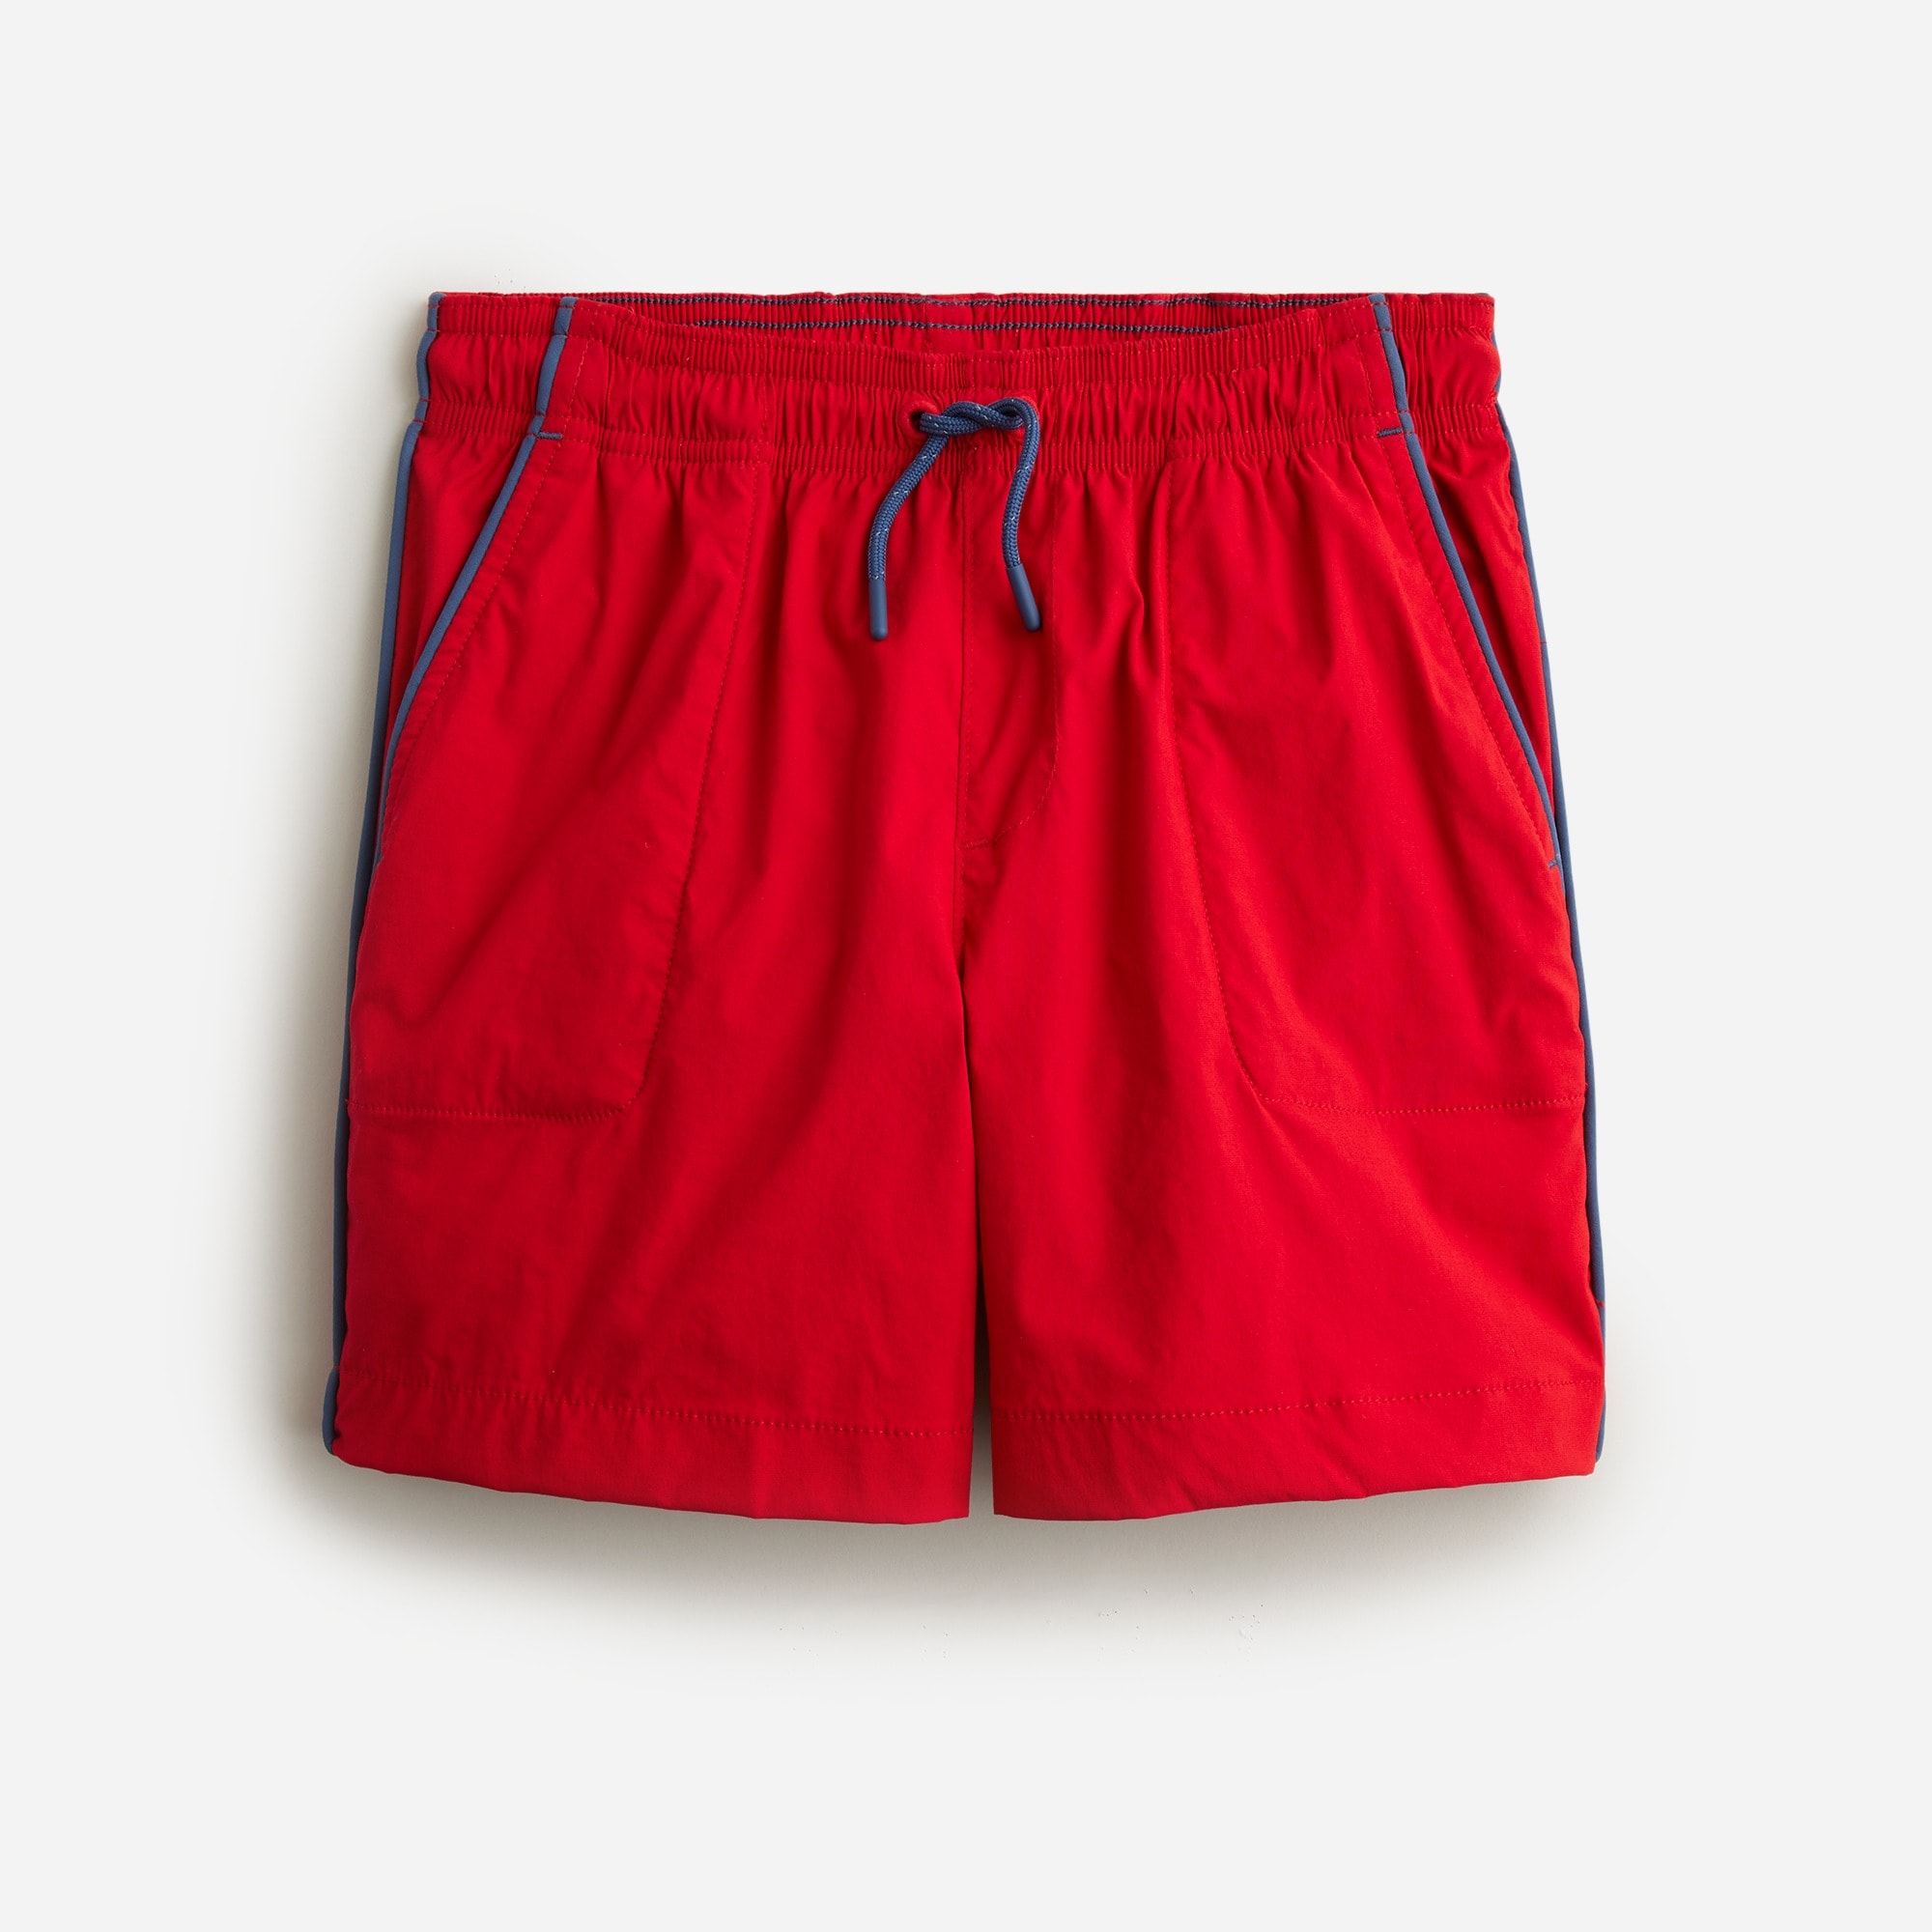  Boys' active dock short with piping